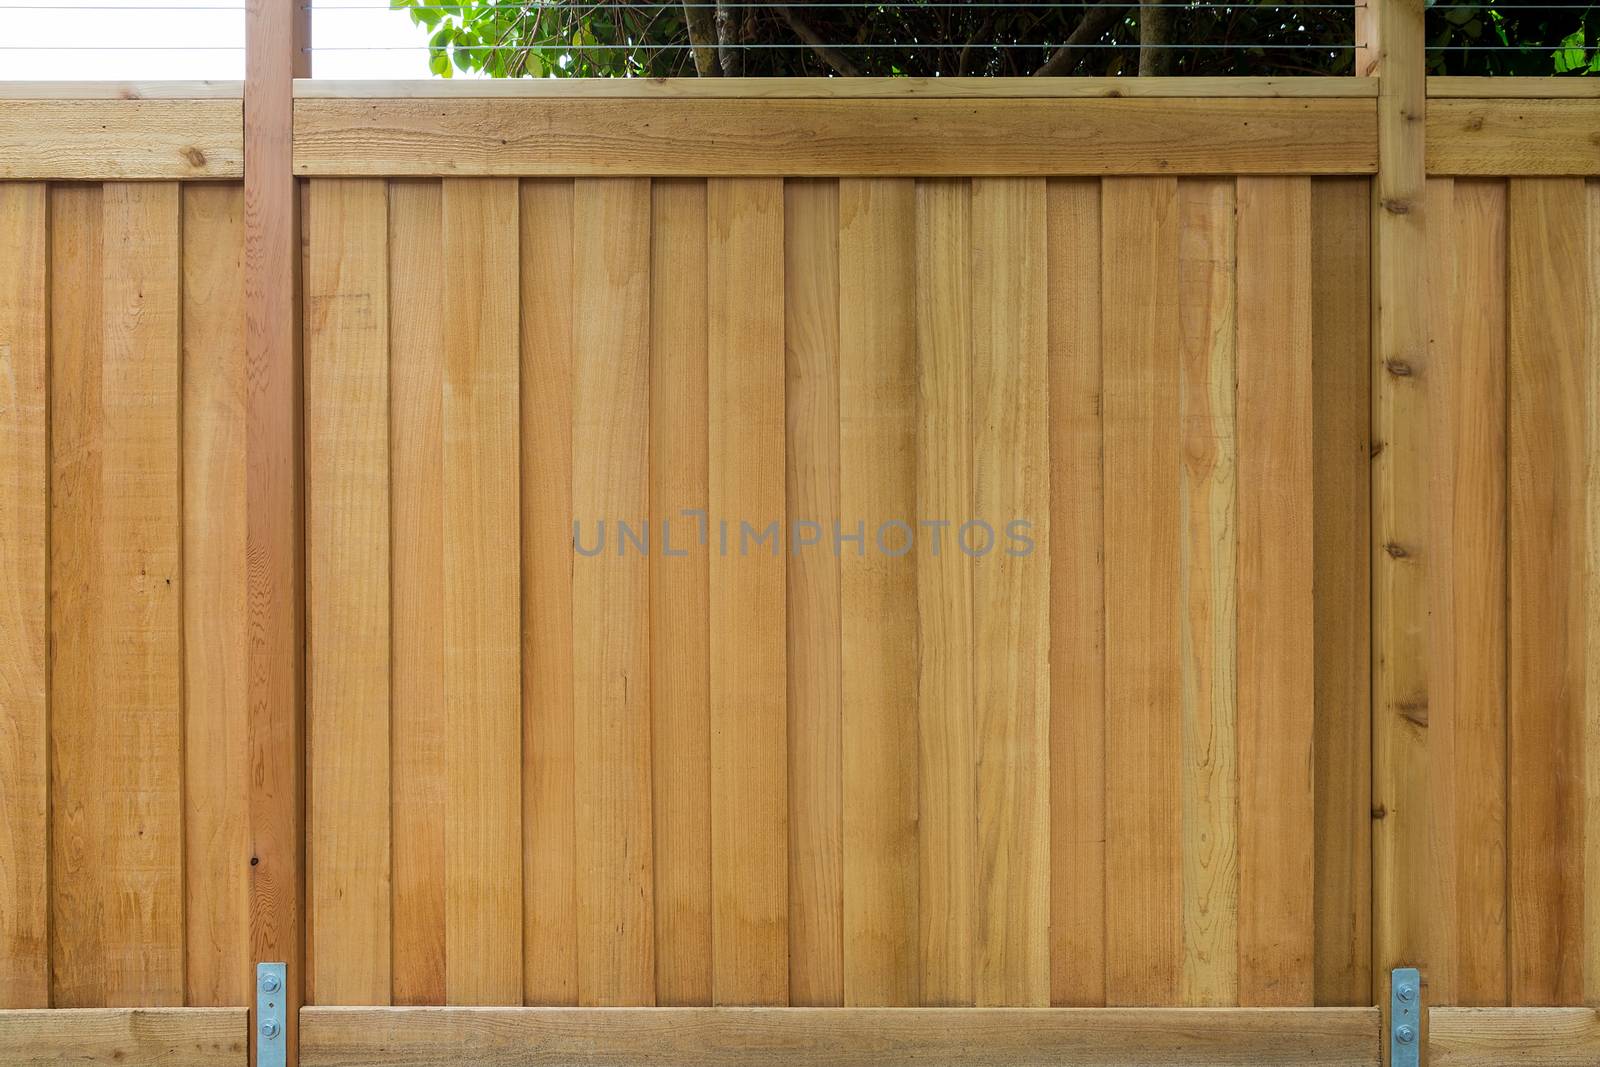 New Cedar Wood Fence around house garden property front view closeup 